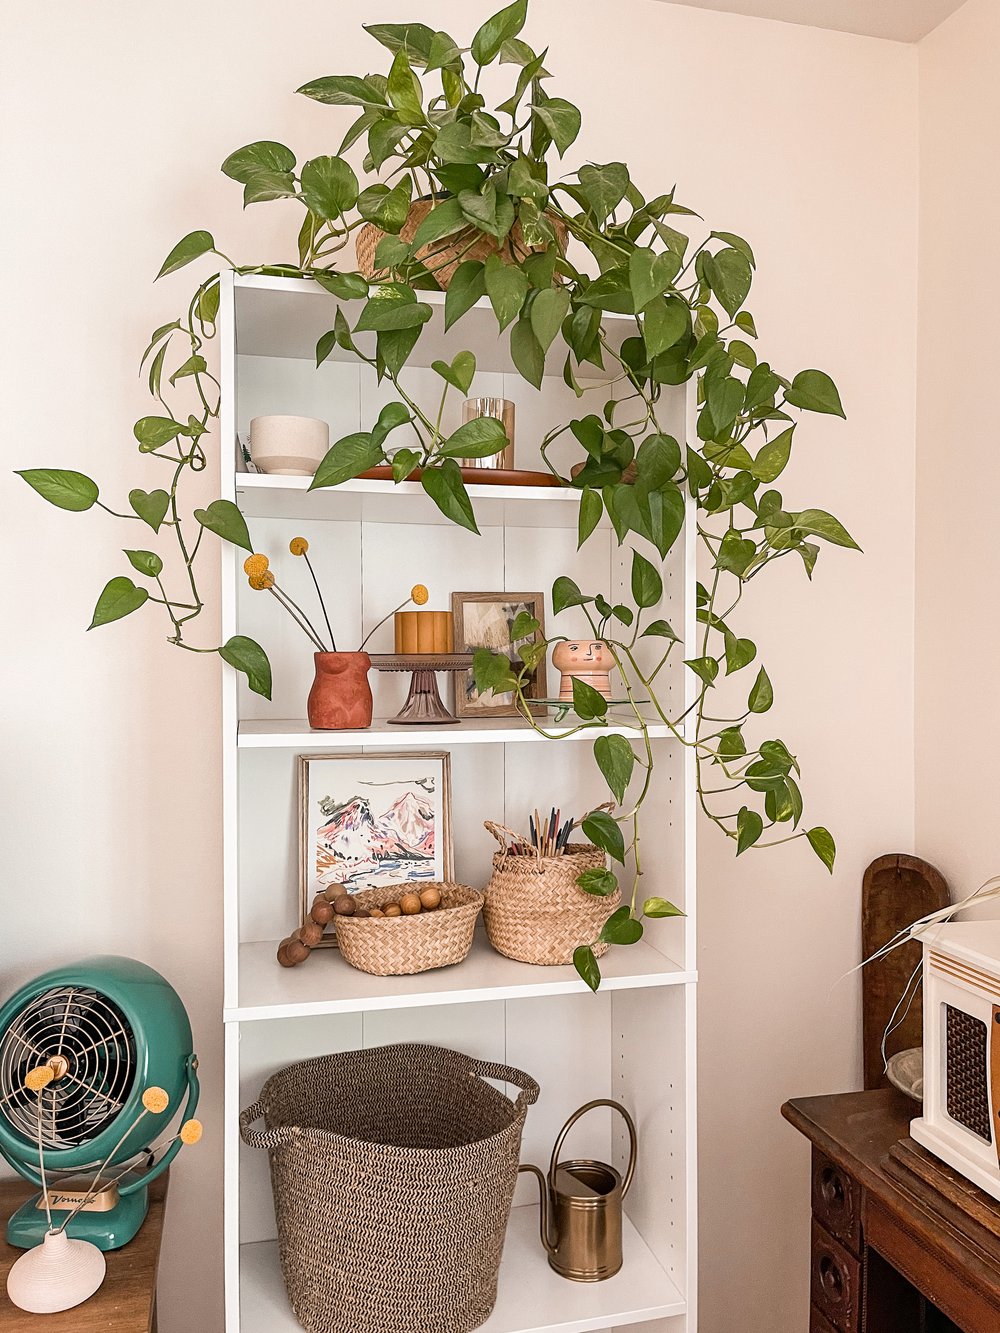 5 Things to Decorate Shelves With — Aratari At Home